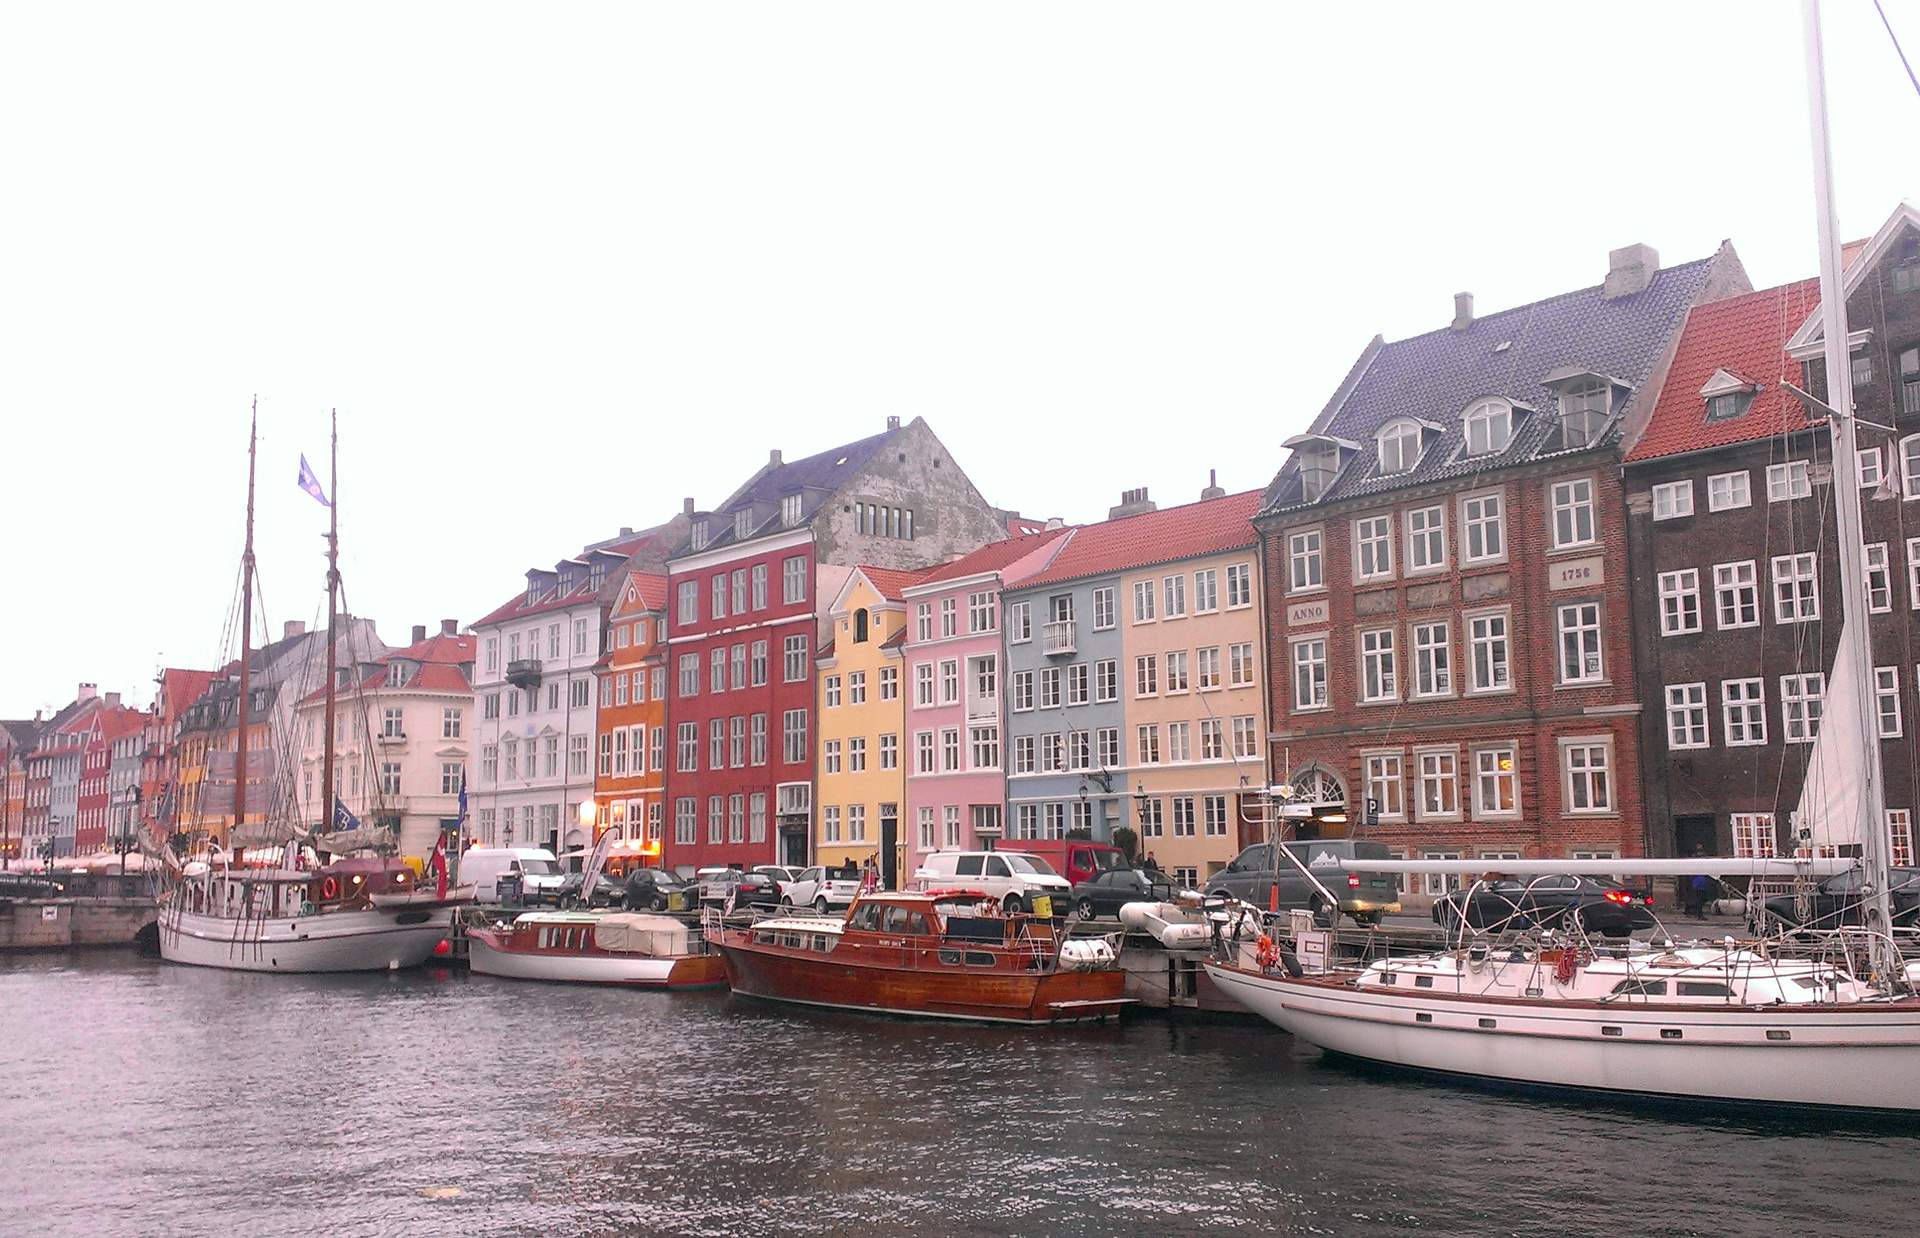 Top 10 things to do in Copenhagen, Must-visit attractions, Local recommendations, Nyhavn highlights, 1920x1240 HD Desktop